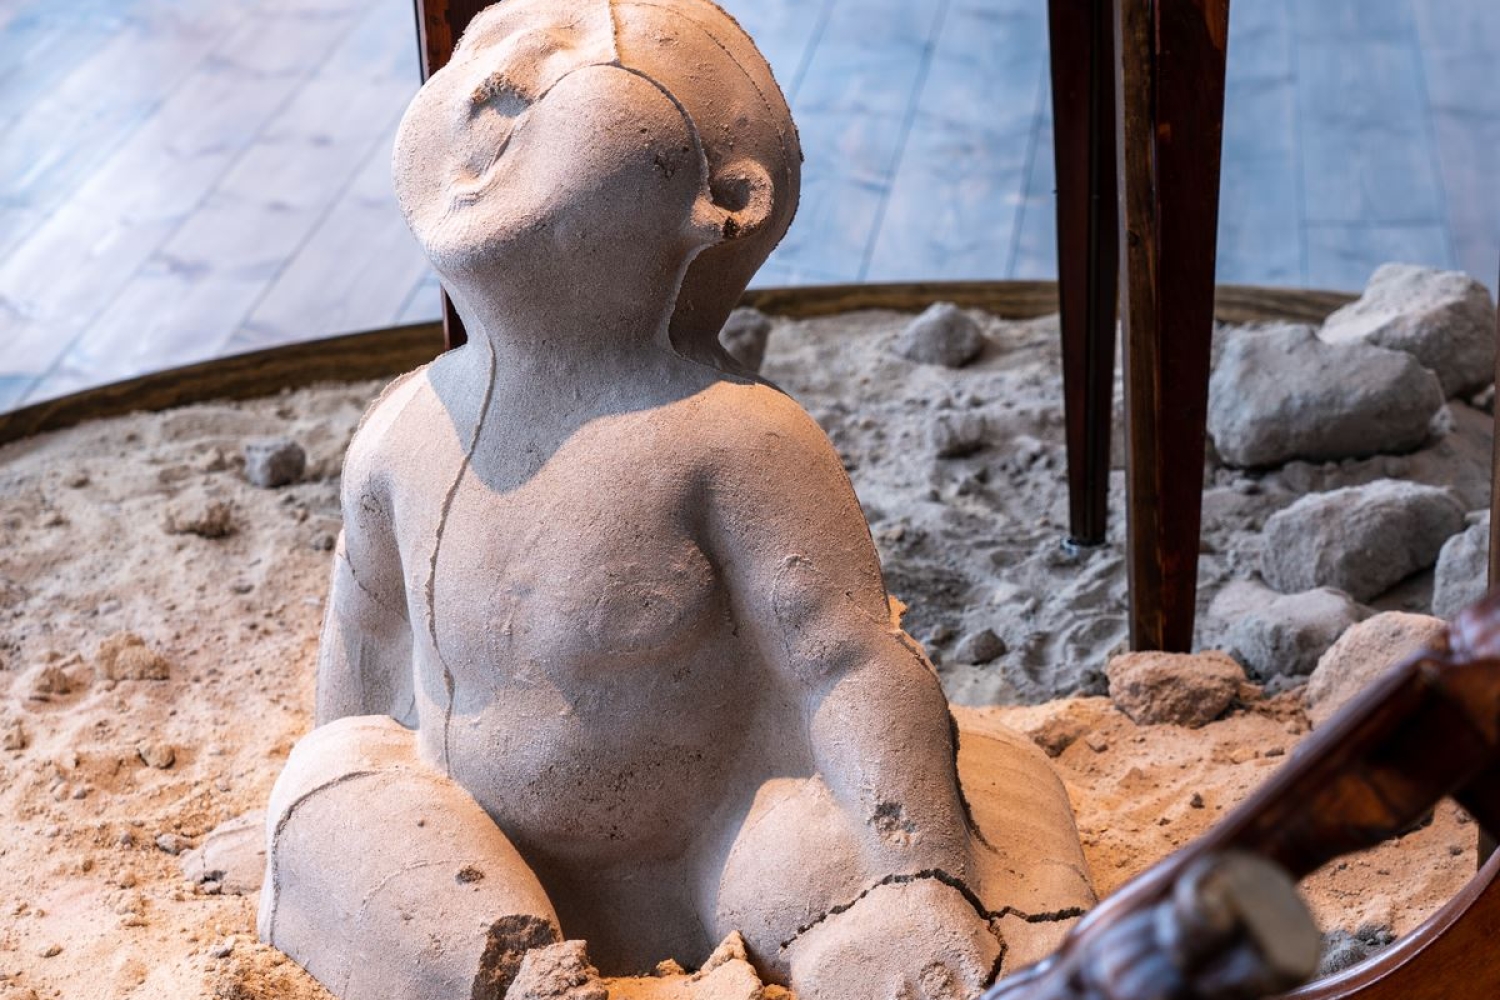 Crying child made of sand